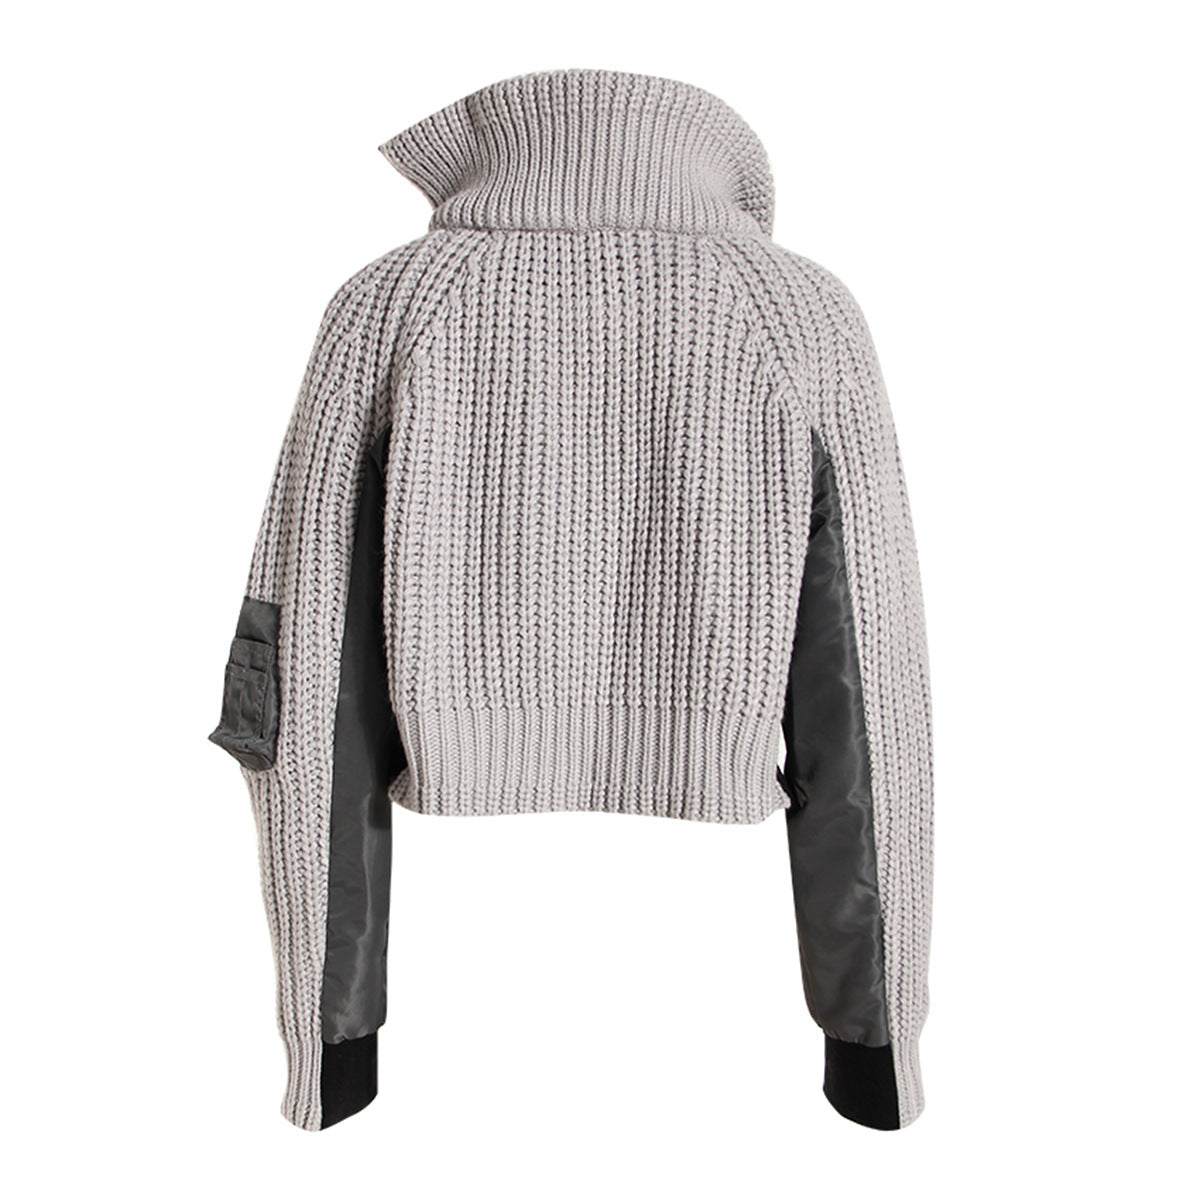 Grey Knitted Jacket For Women